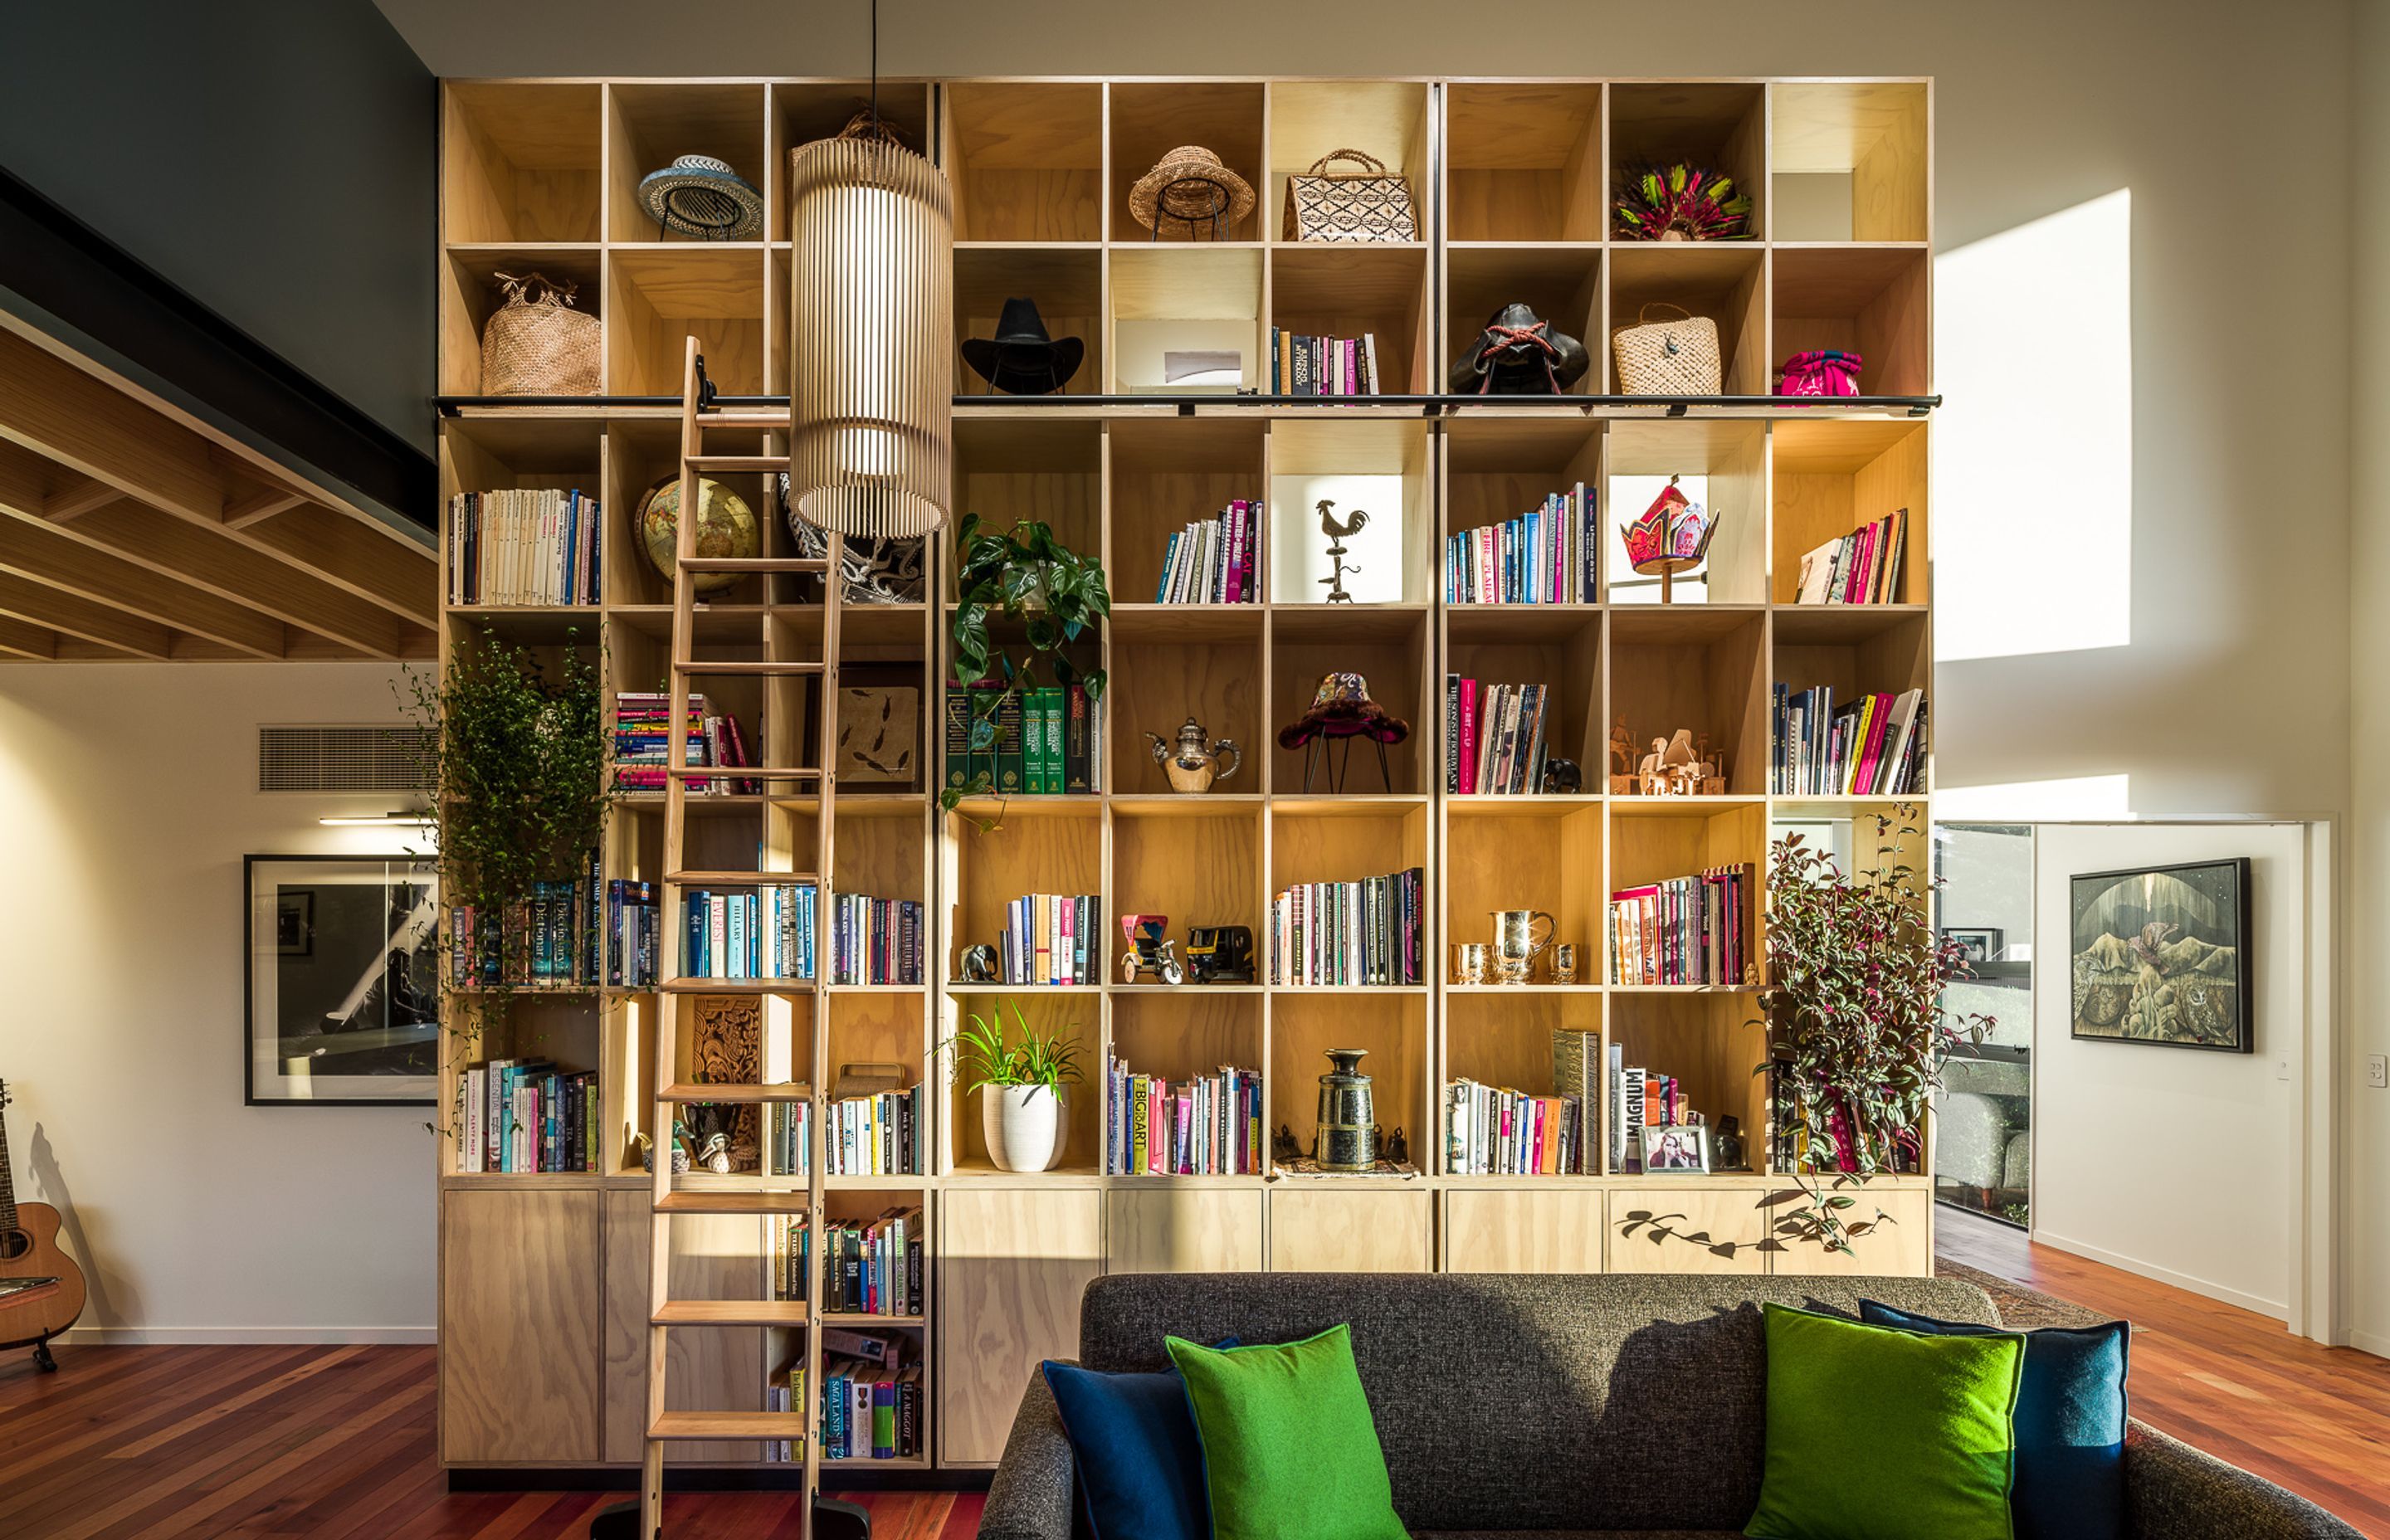 The bookcase is, in itself, a work of art, making a sculptural statement in the living area.